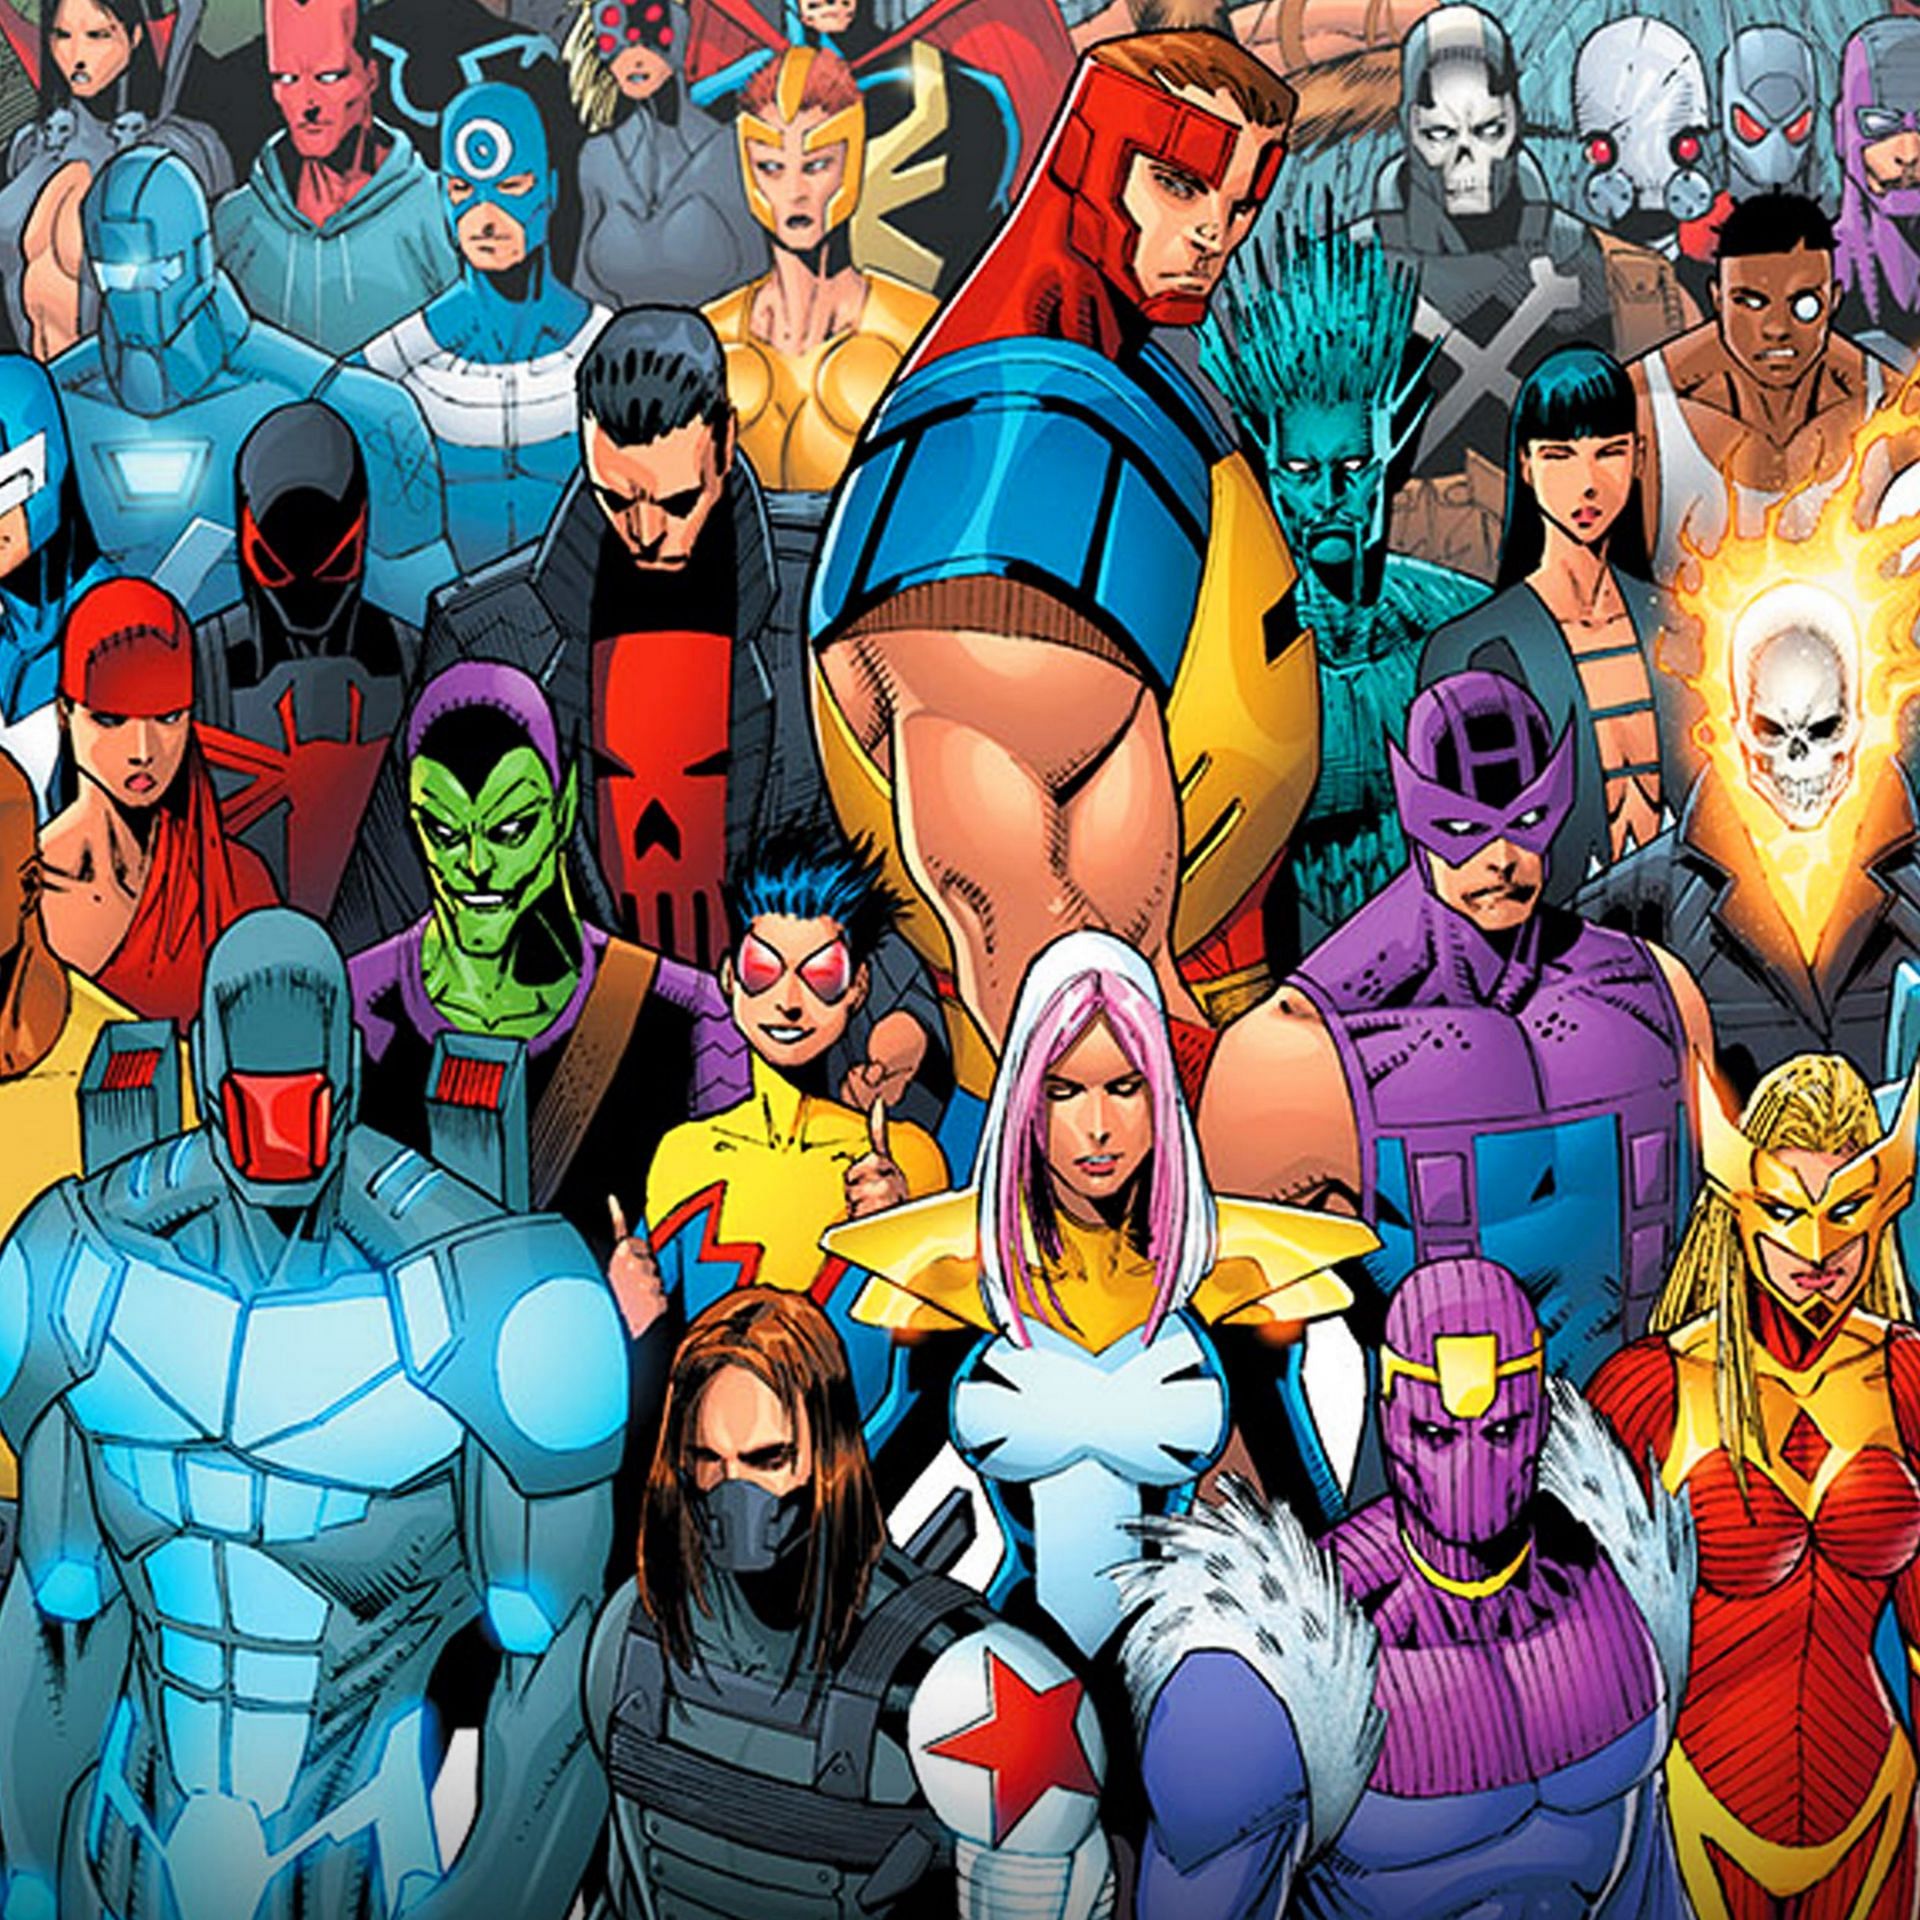 The group from the comics (Image via Marvel Comics)